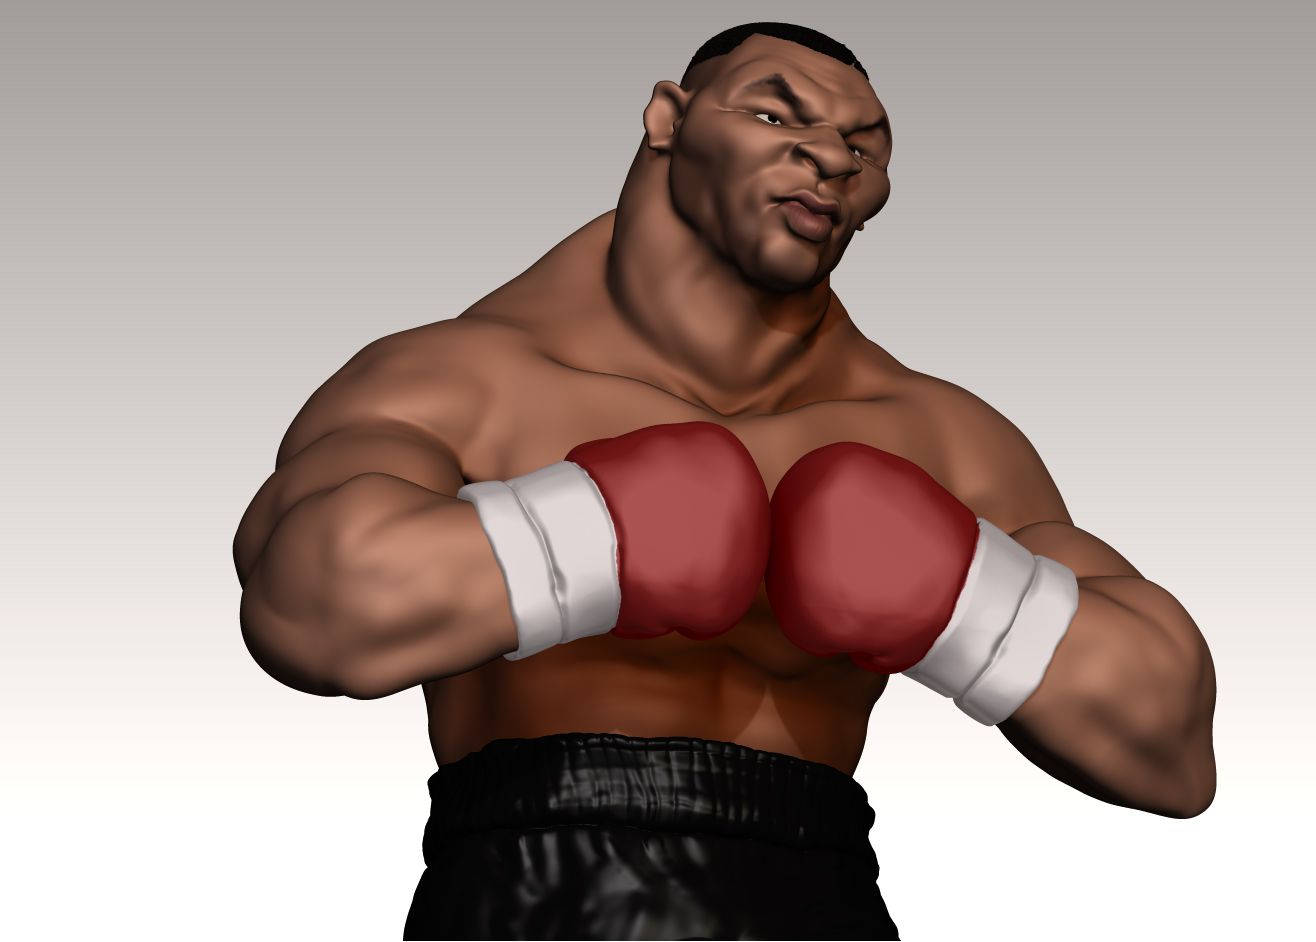 Miketyson 4k Cartoon Art Would Be Translated To 